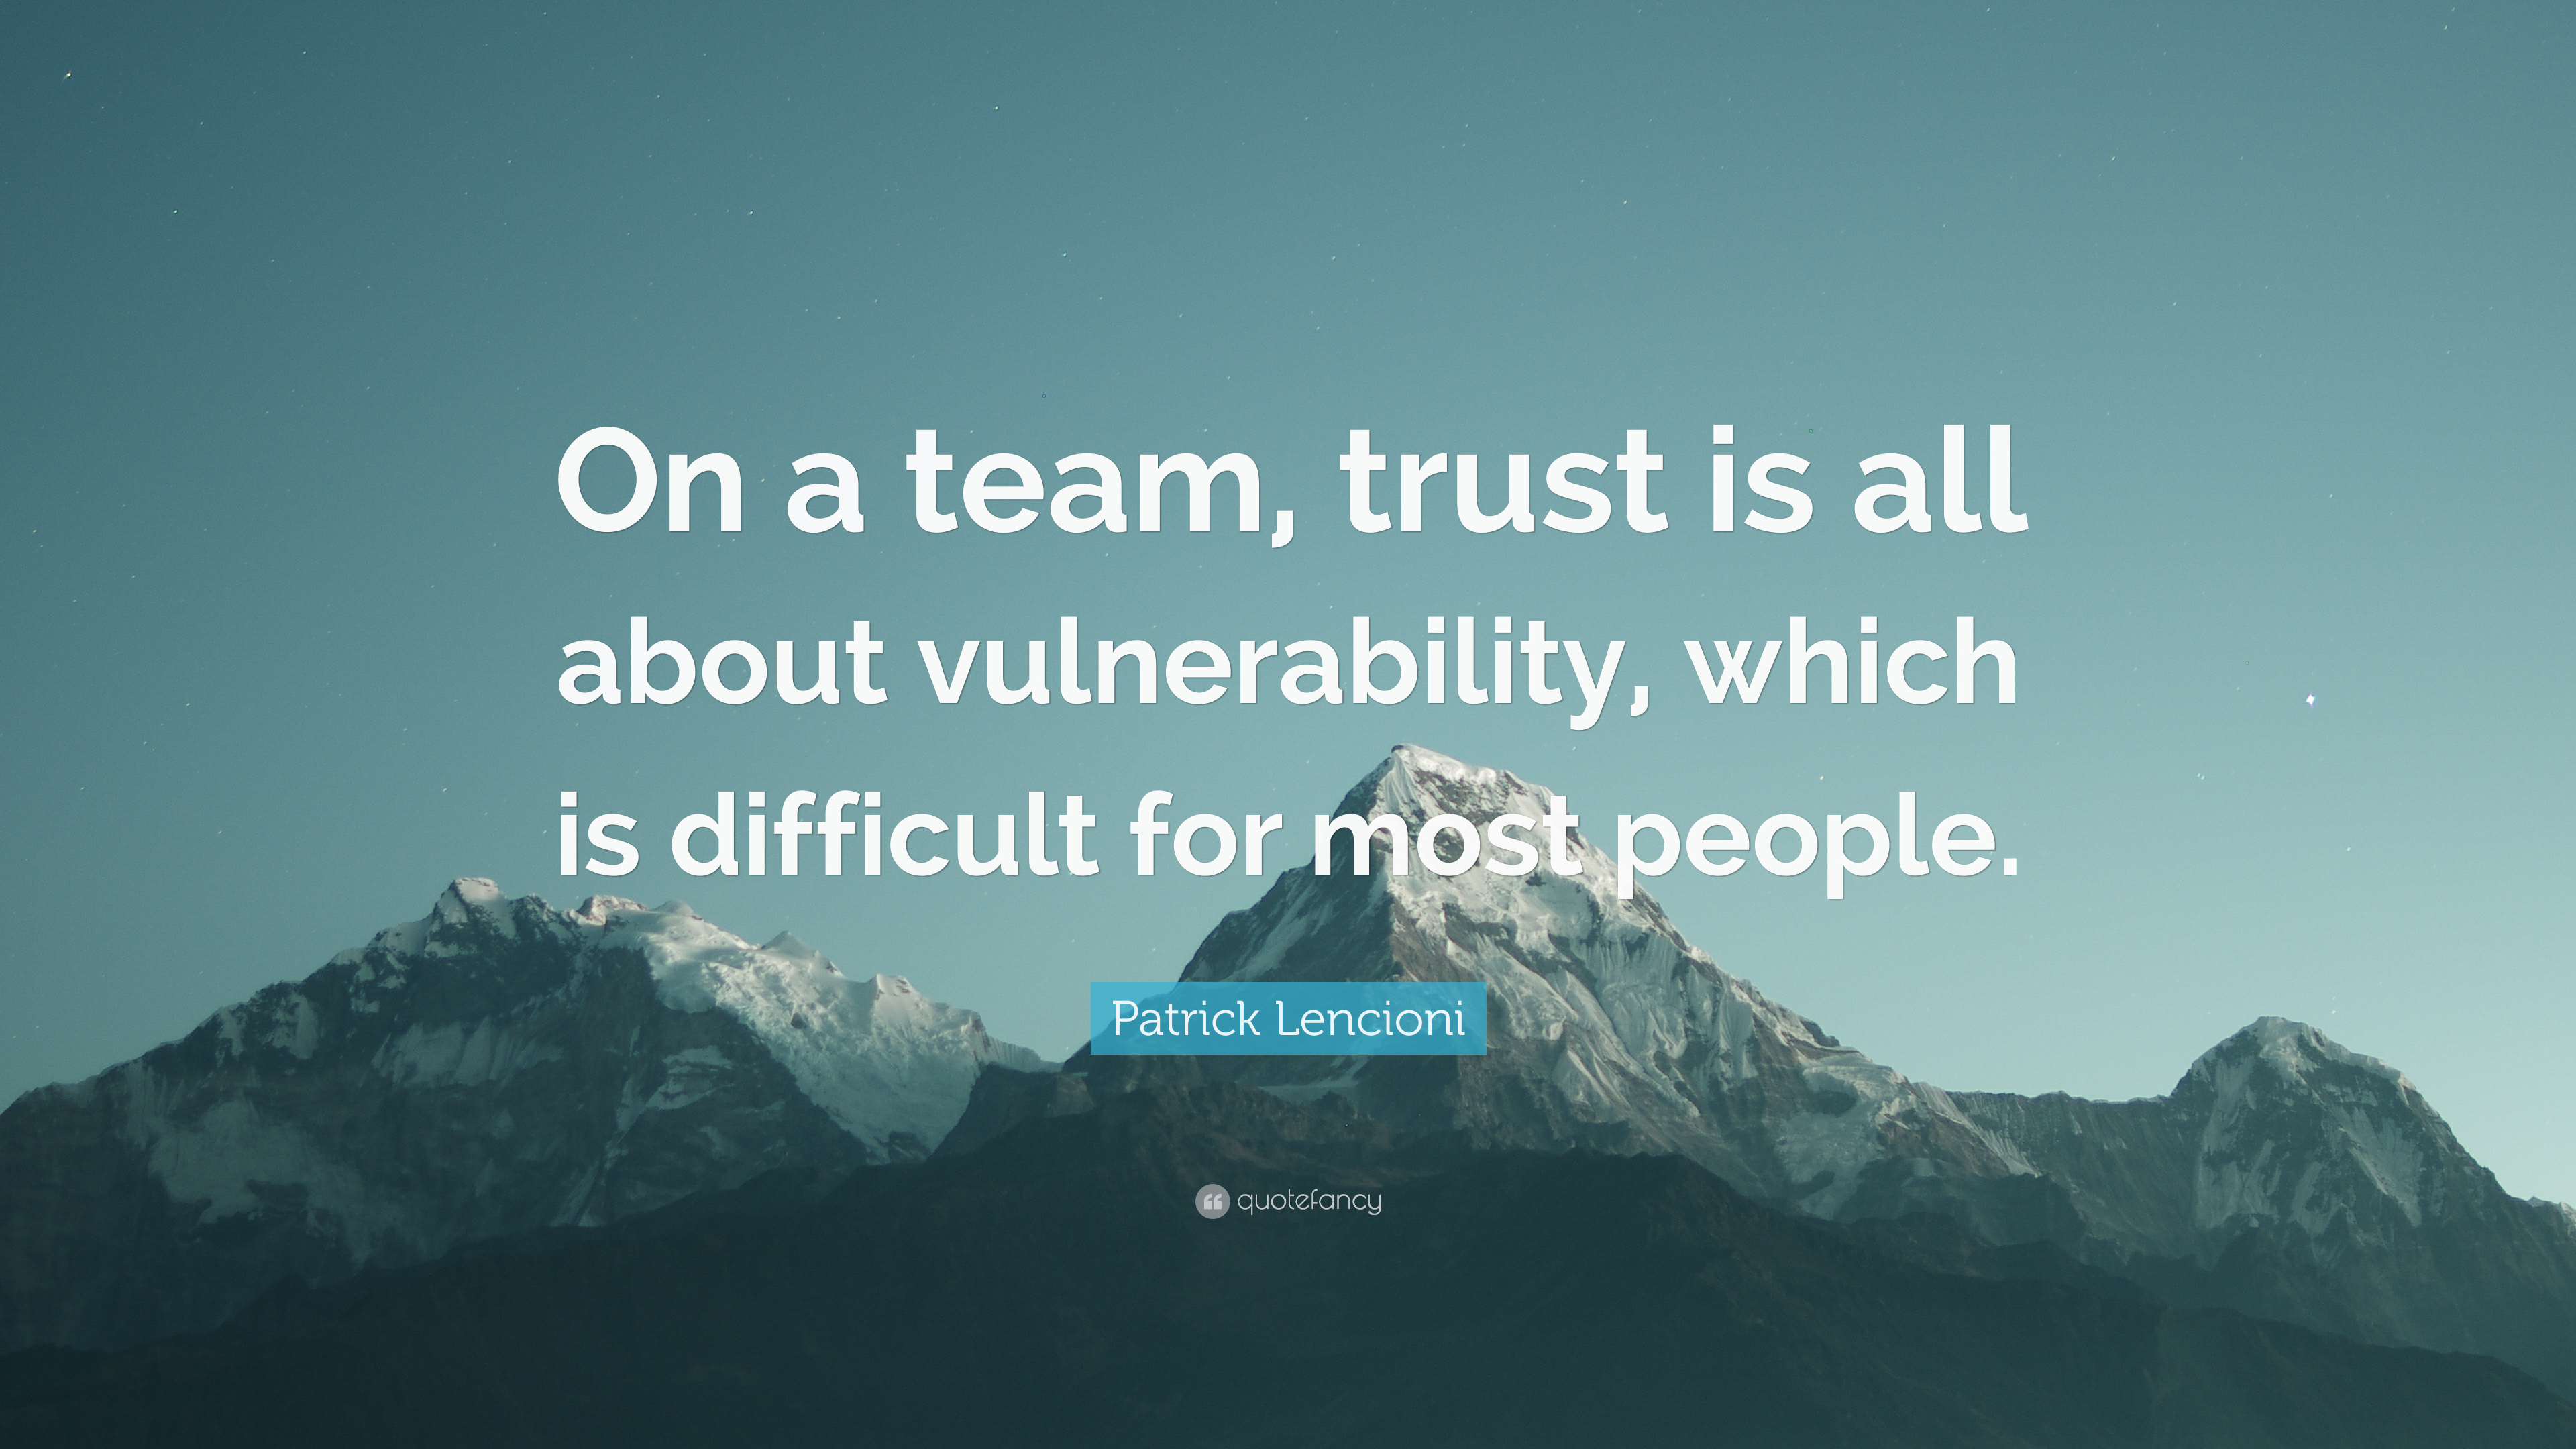 on a team, trust is all about vulnerability which is difficult for most people. patrick lencioni